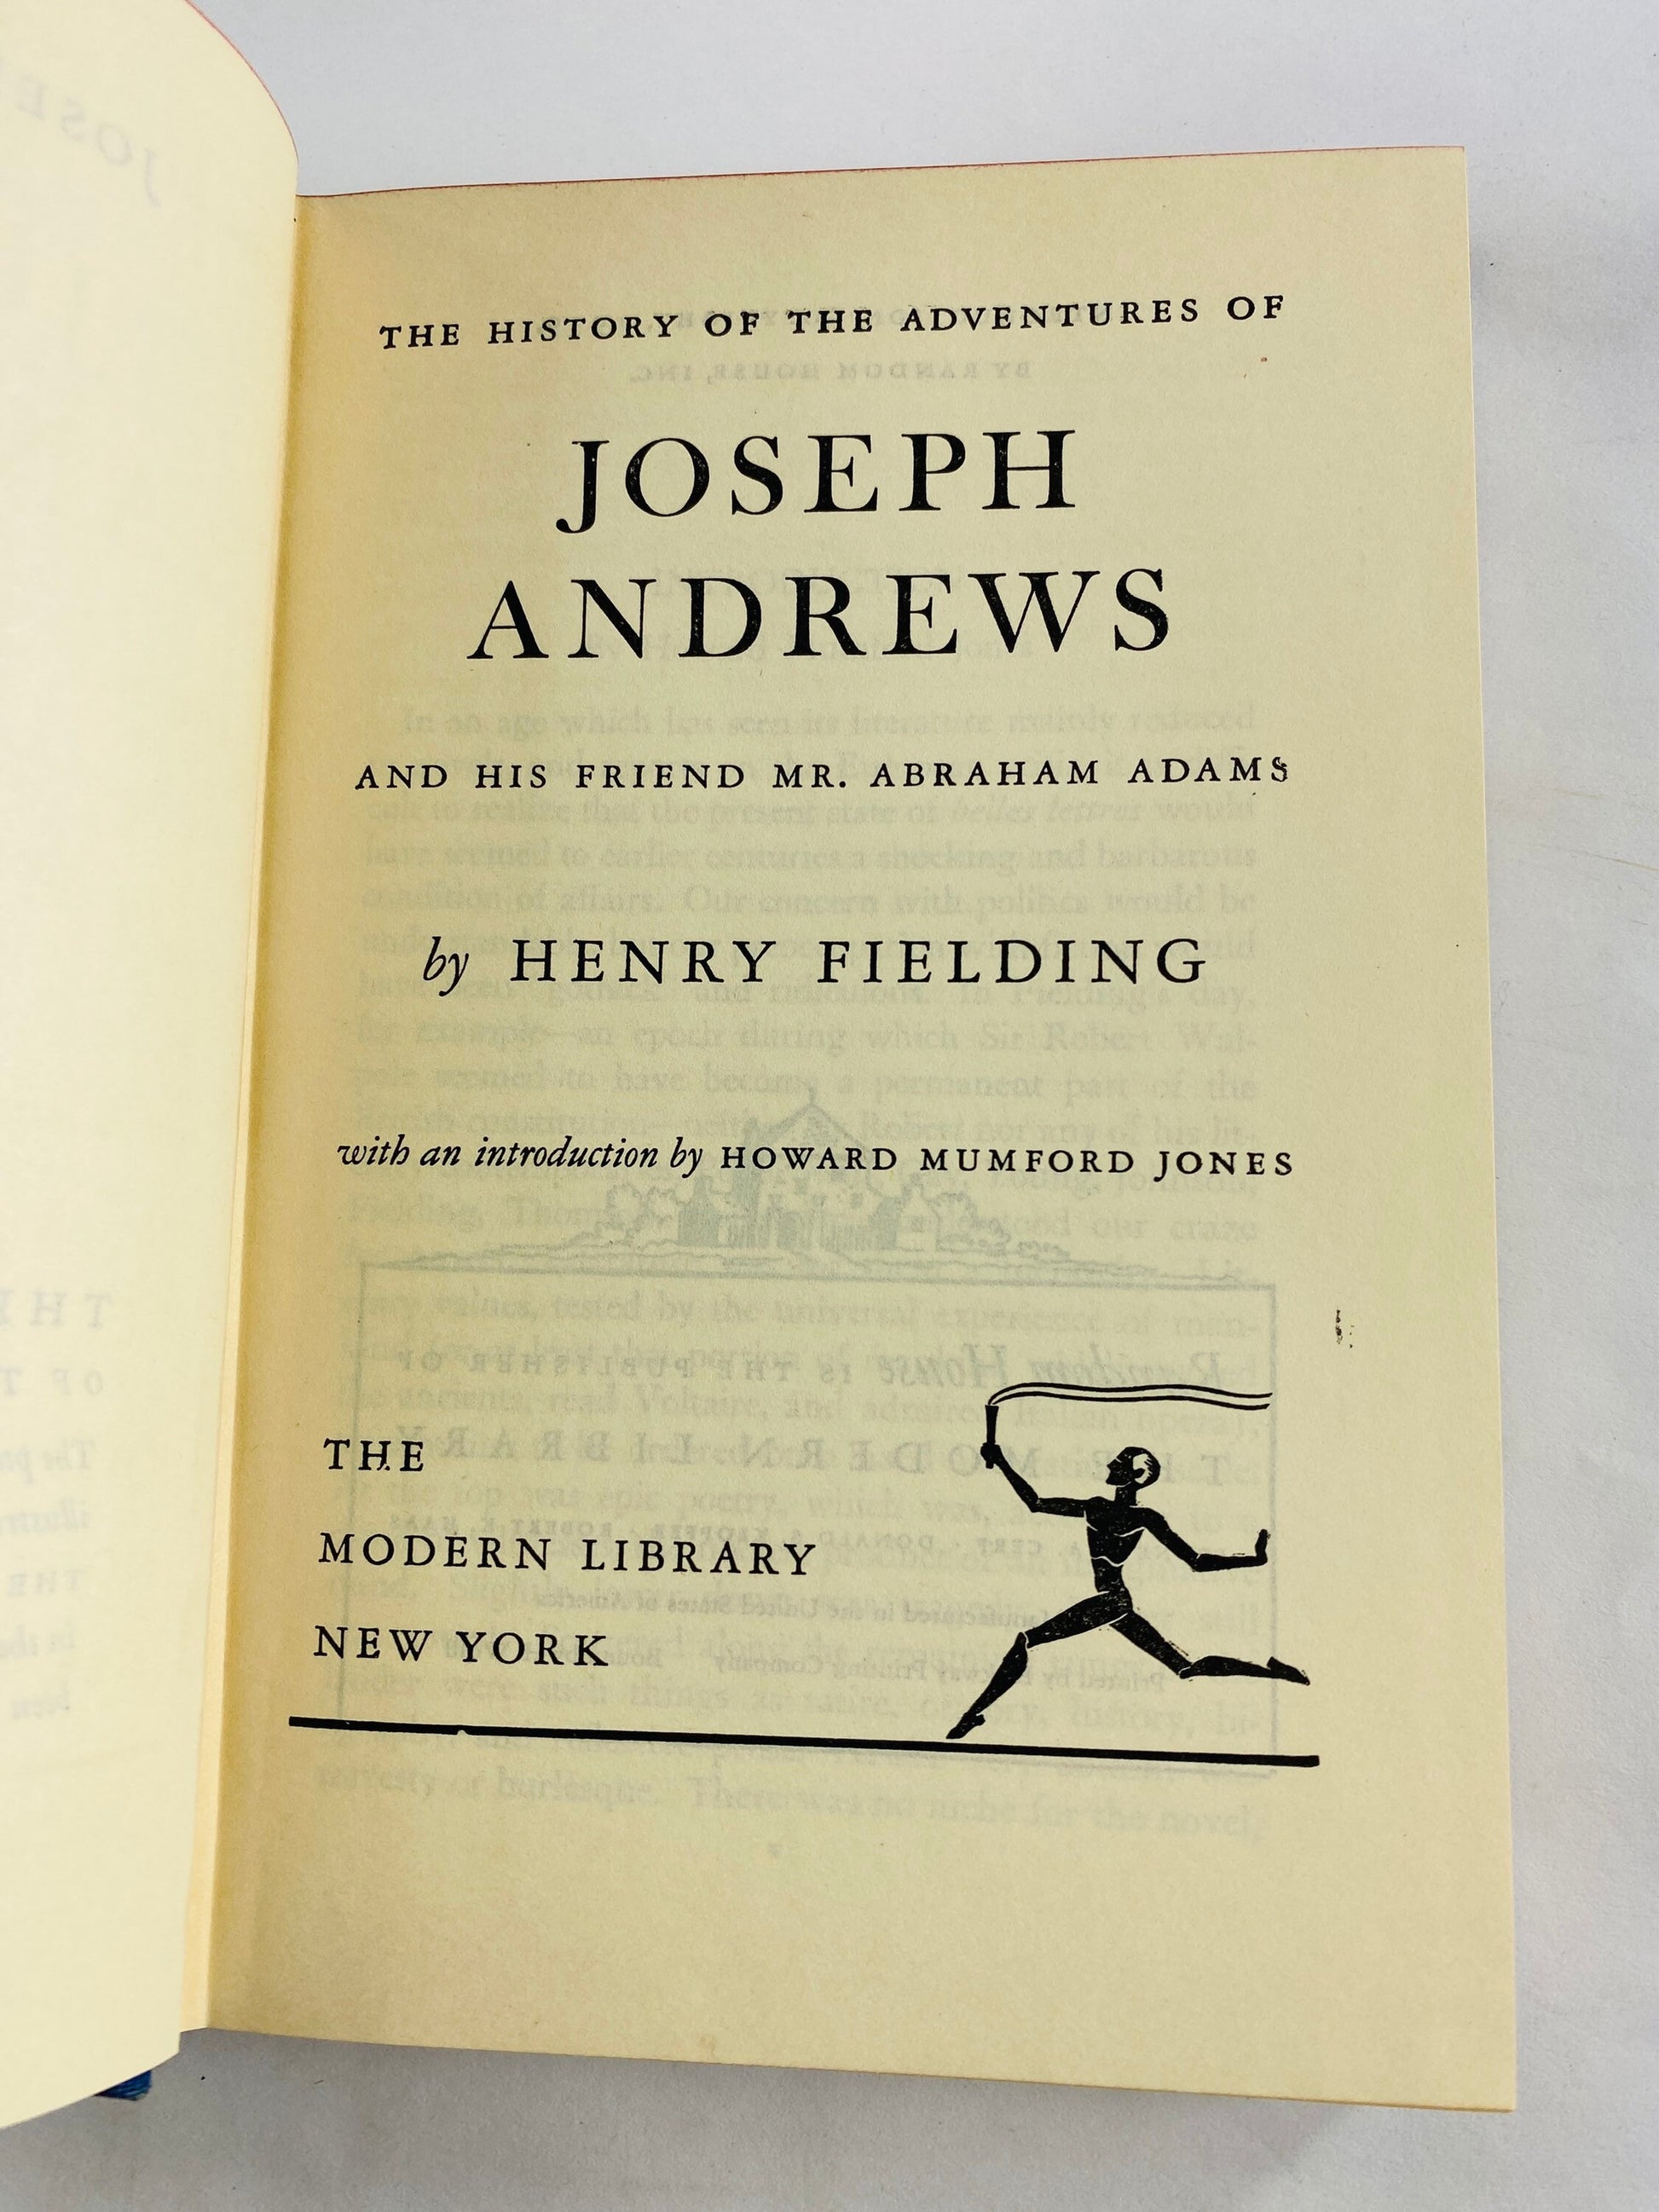 1939 History and Adventures of Joseph Andrews vintage book marks the beginning of Henry Fielding's career as a serious novelist Blue decor